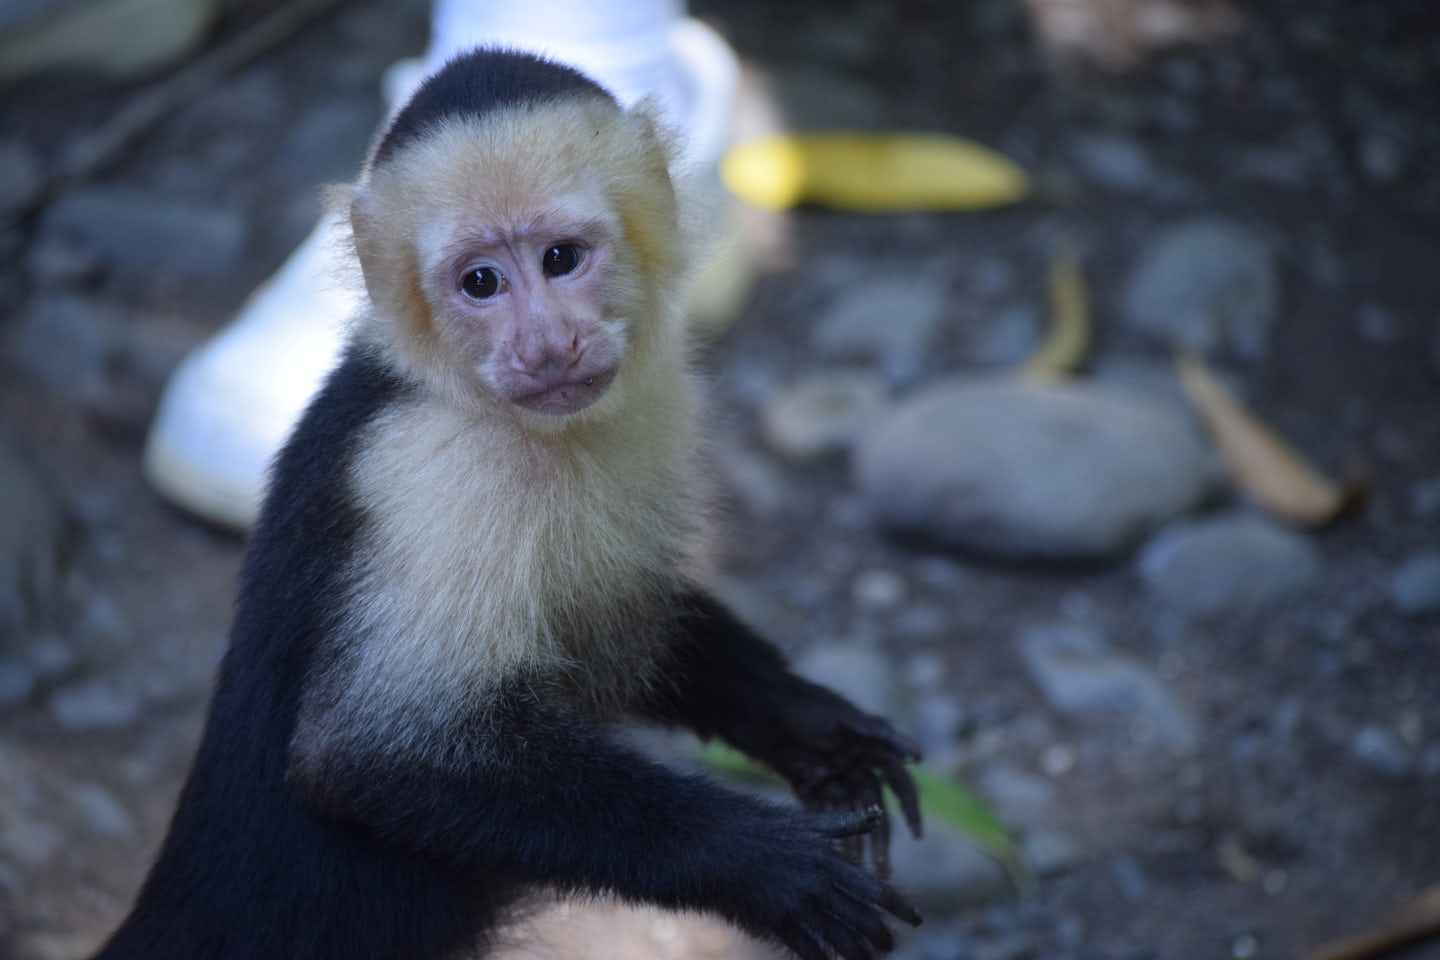 This little Capuchin monkey crawled across my arms for a treat in Costa Rica!